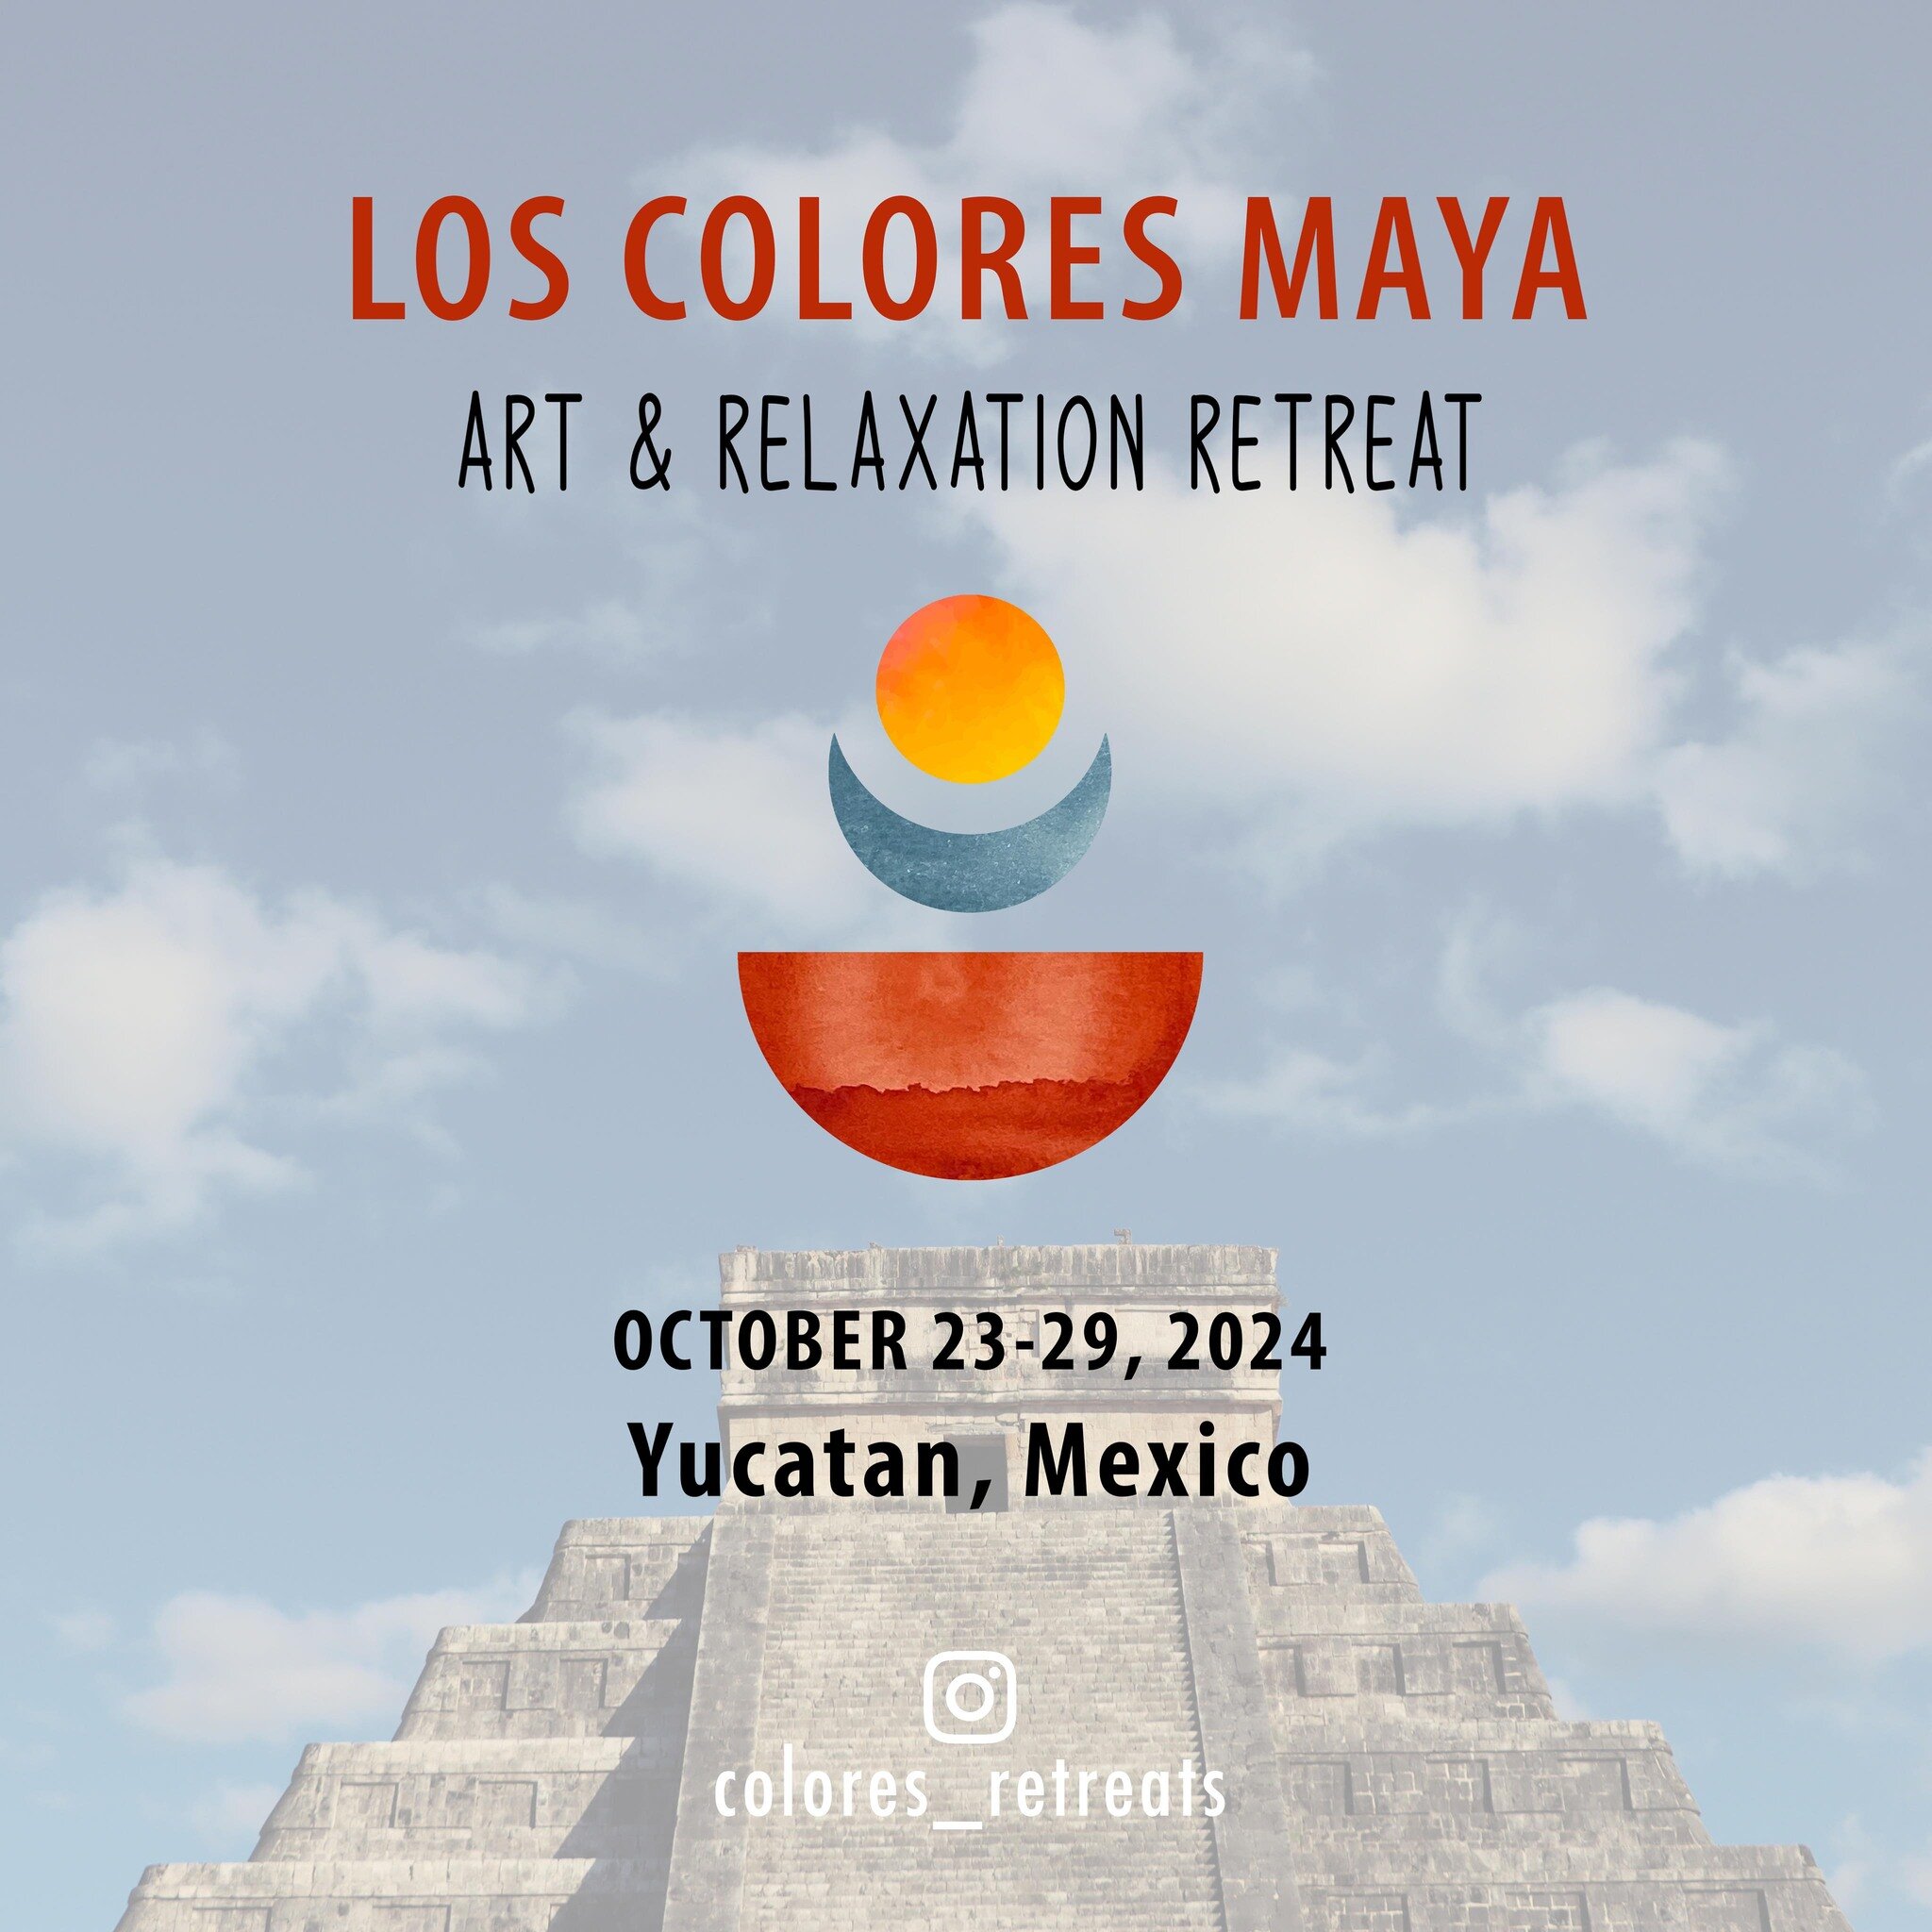 We are thrilled to announce our 2024 retreat which will take place in a gorgeous hacienda near M&eacute;rida, Mexico! DM us for early bird discounts. Join us and unleash your inner rainbow! @colores_retreats #womentravellers #meditationretreat @klyth